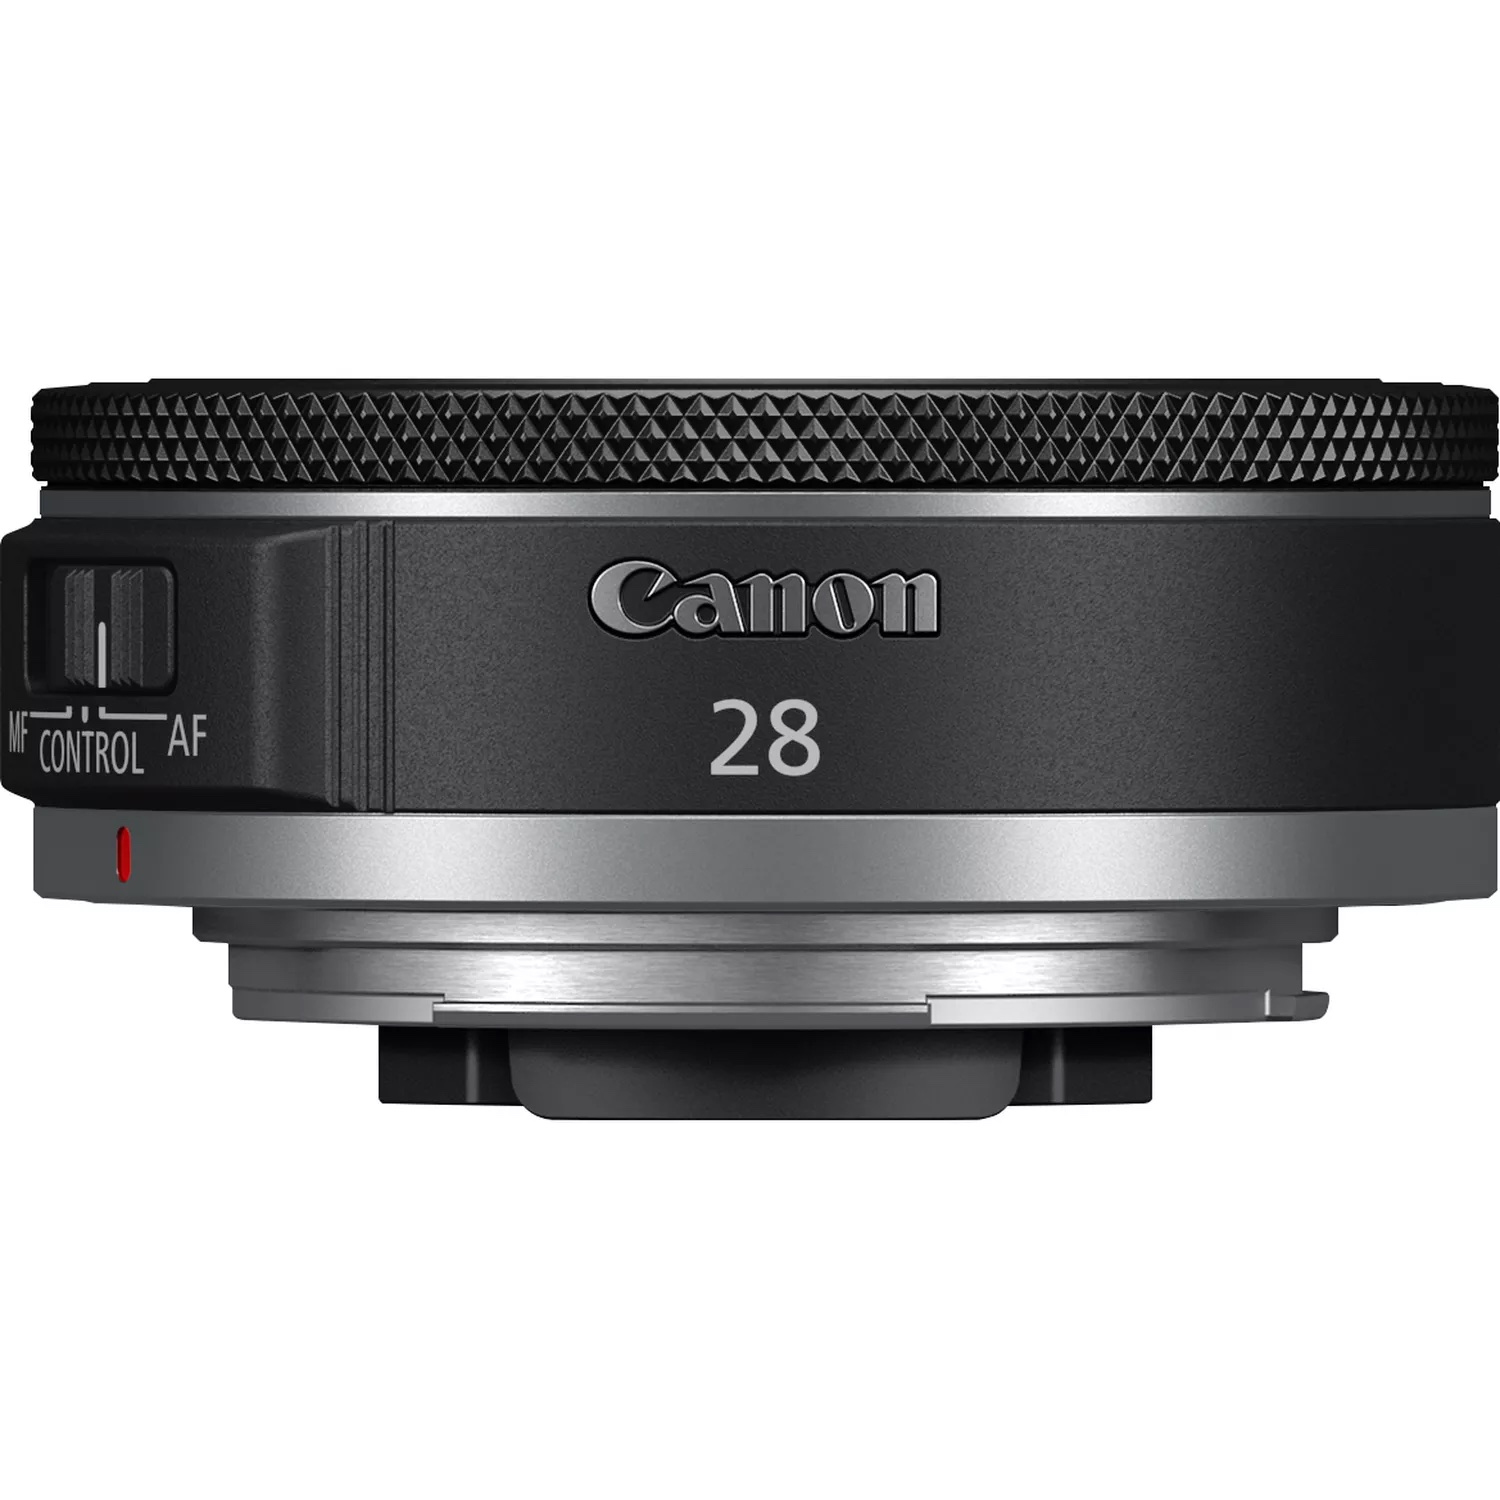 Canon RF 28mm F2.8 STM MILC Bred zoomlinse Sort